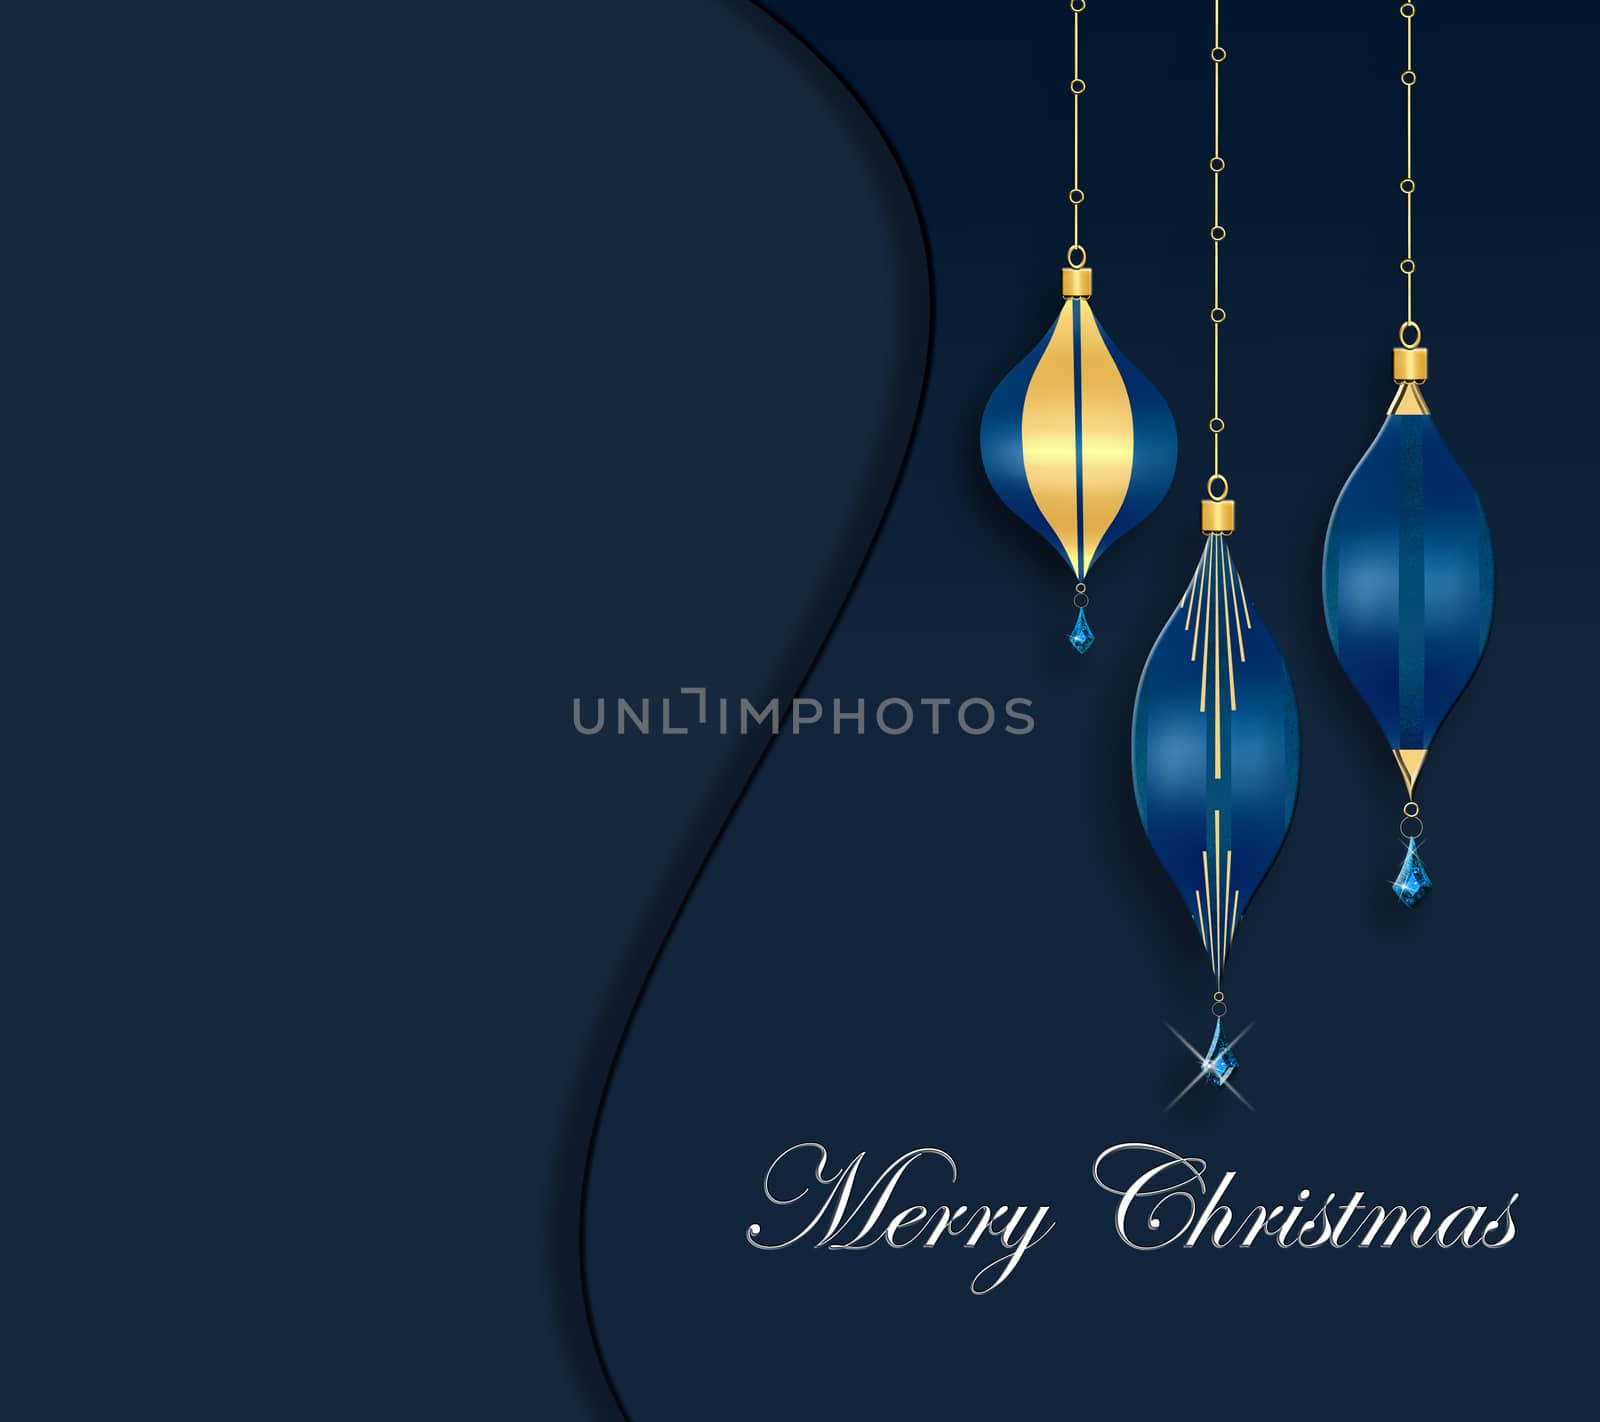 Elegant greetings background for Christmas or New Year by NelliPolk